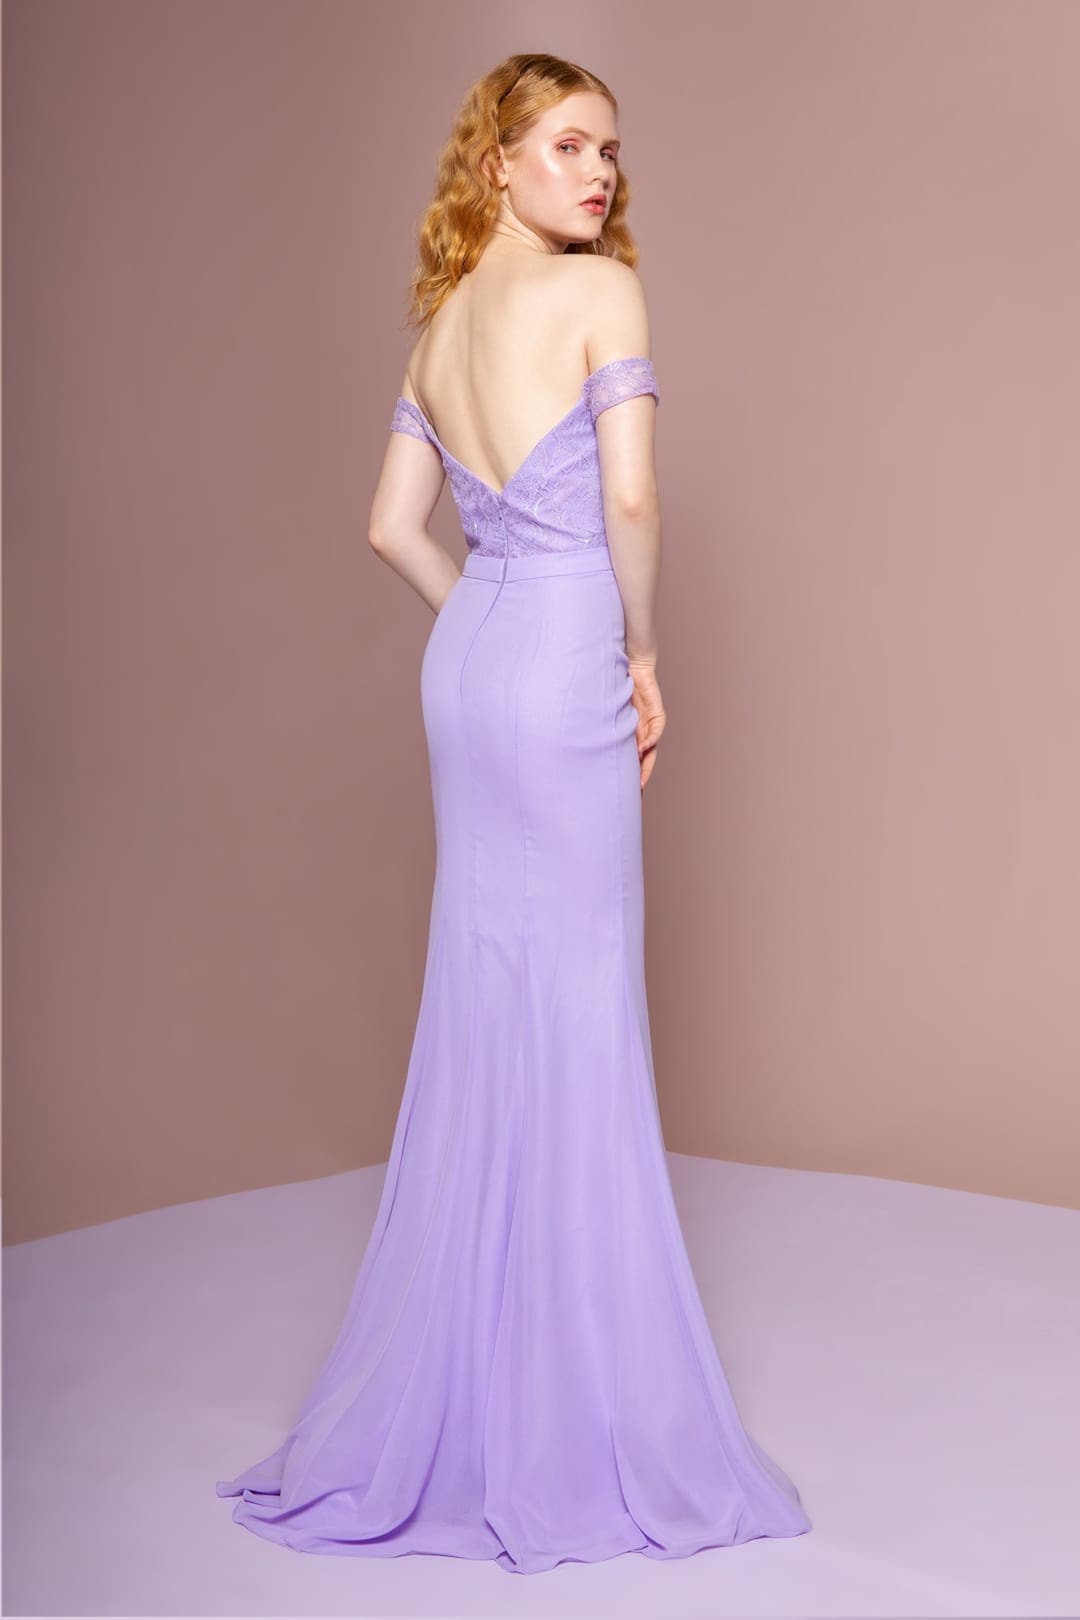 Classy Evening Formal Gown